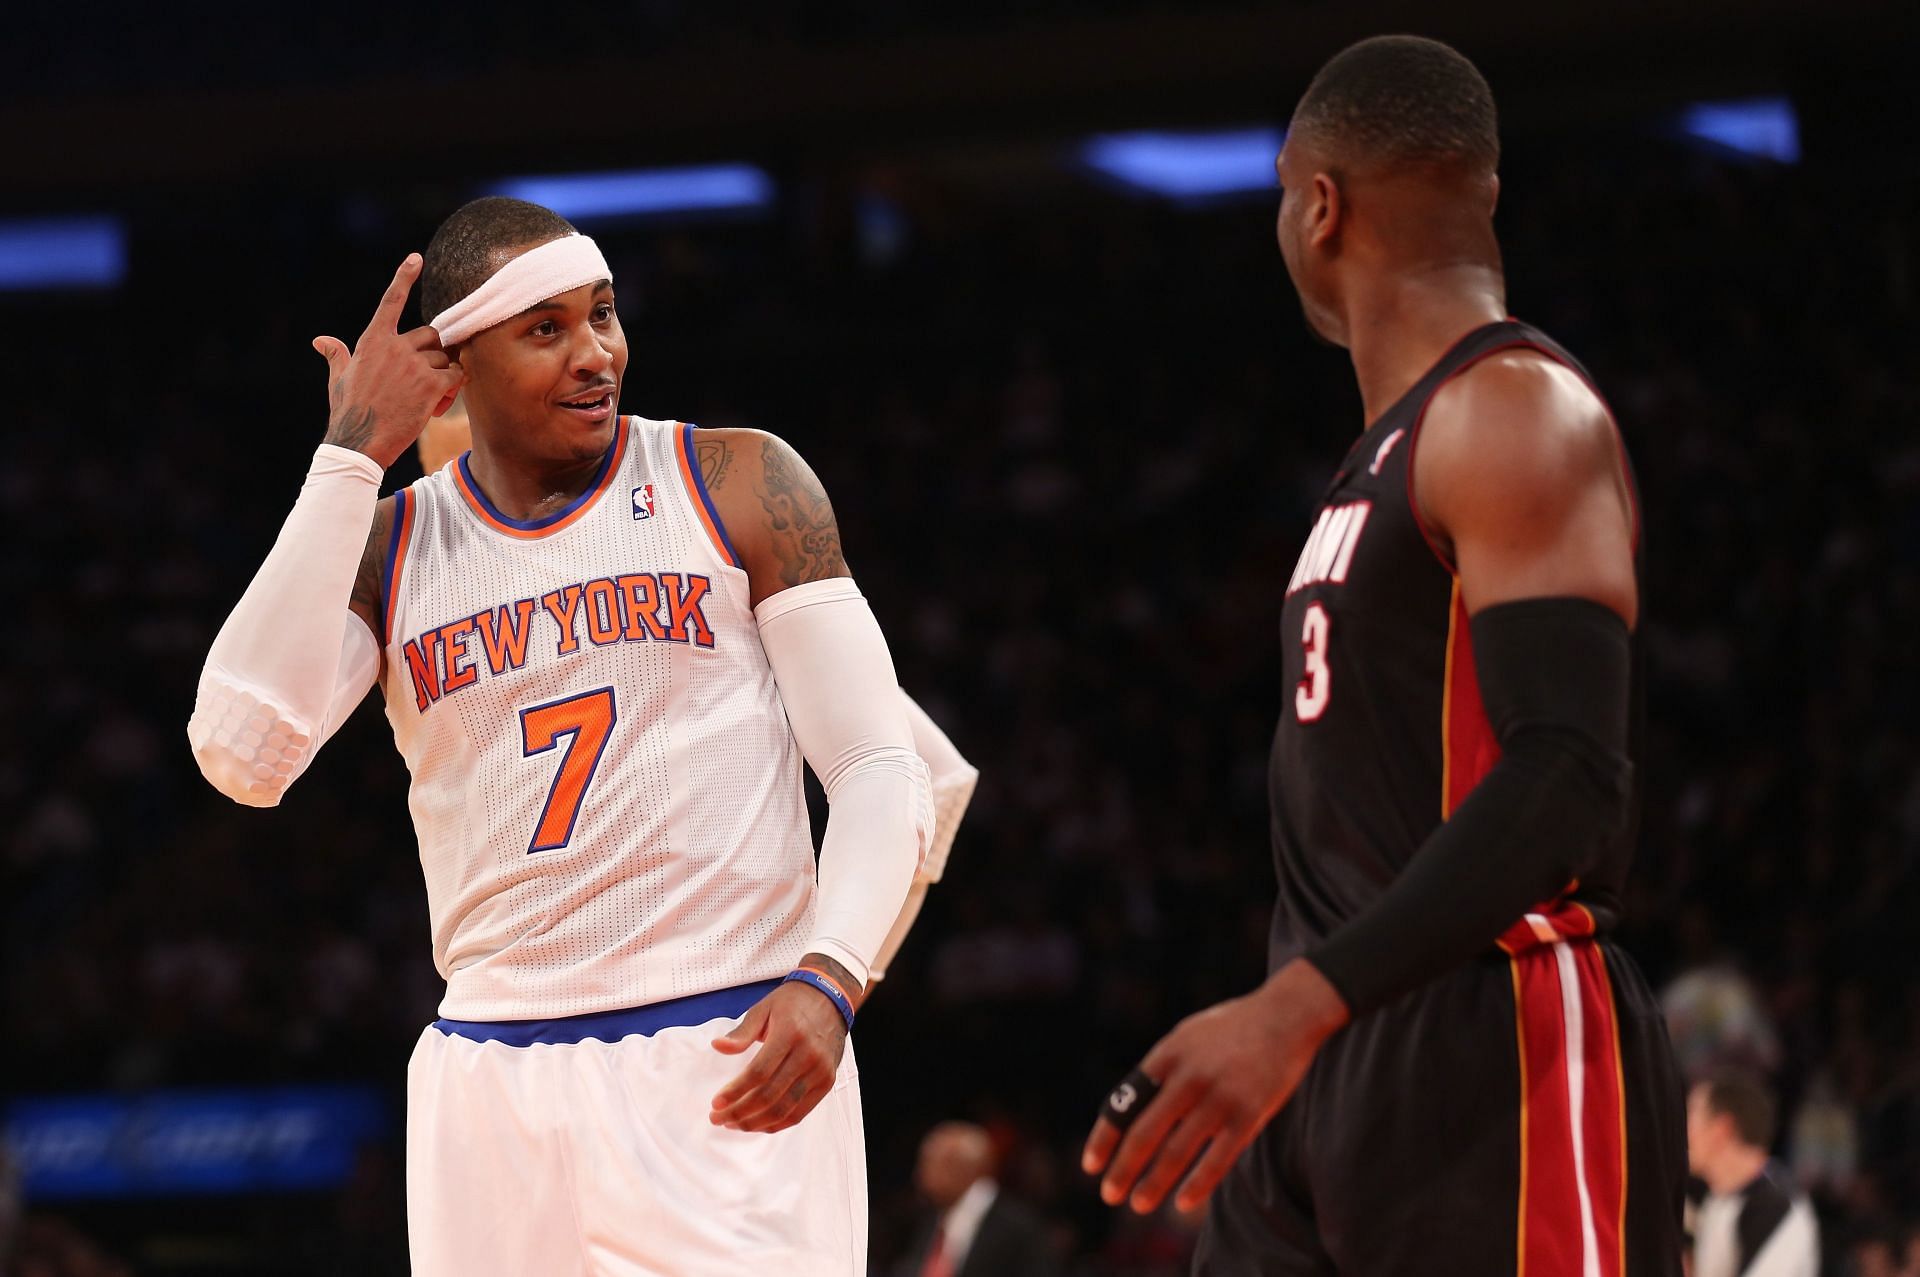 Carmelo Anthony of the New York Knicks gestures to Dwyane Wade of the Miami Heat